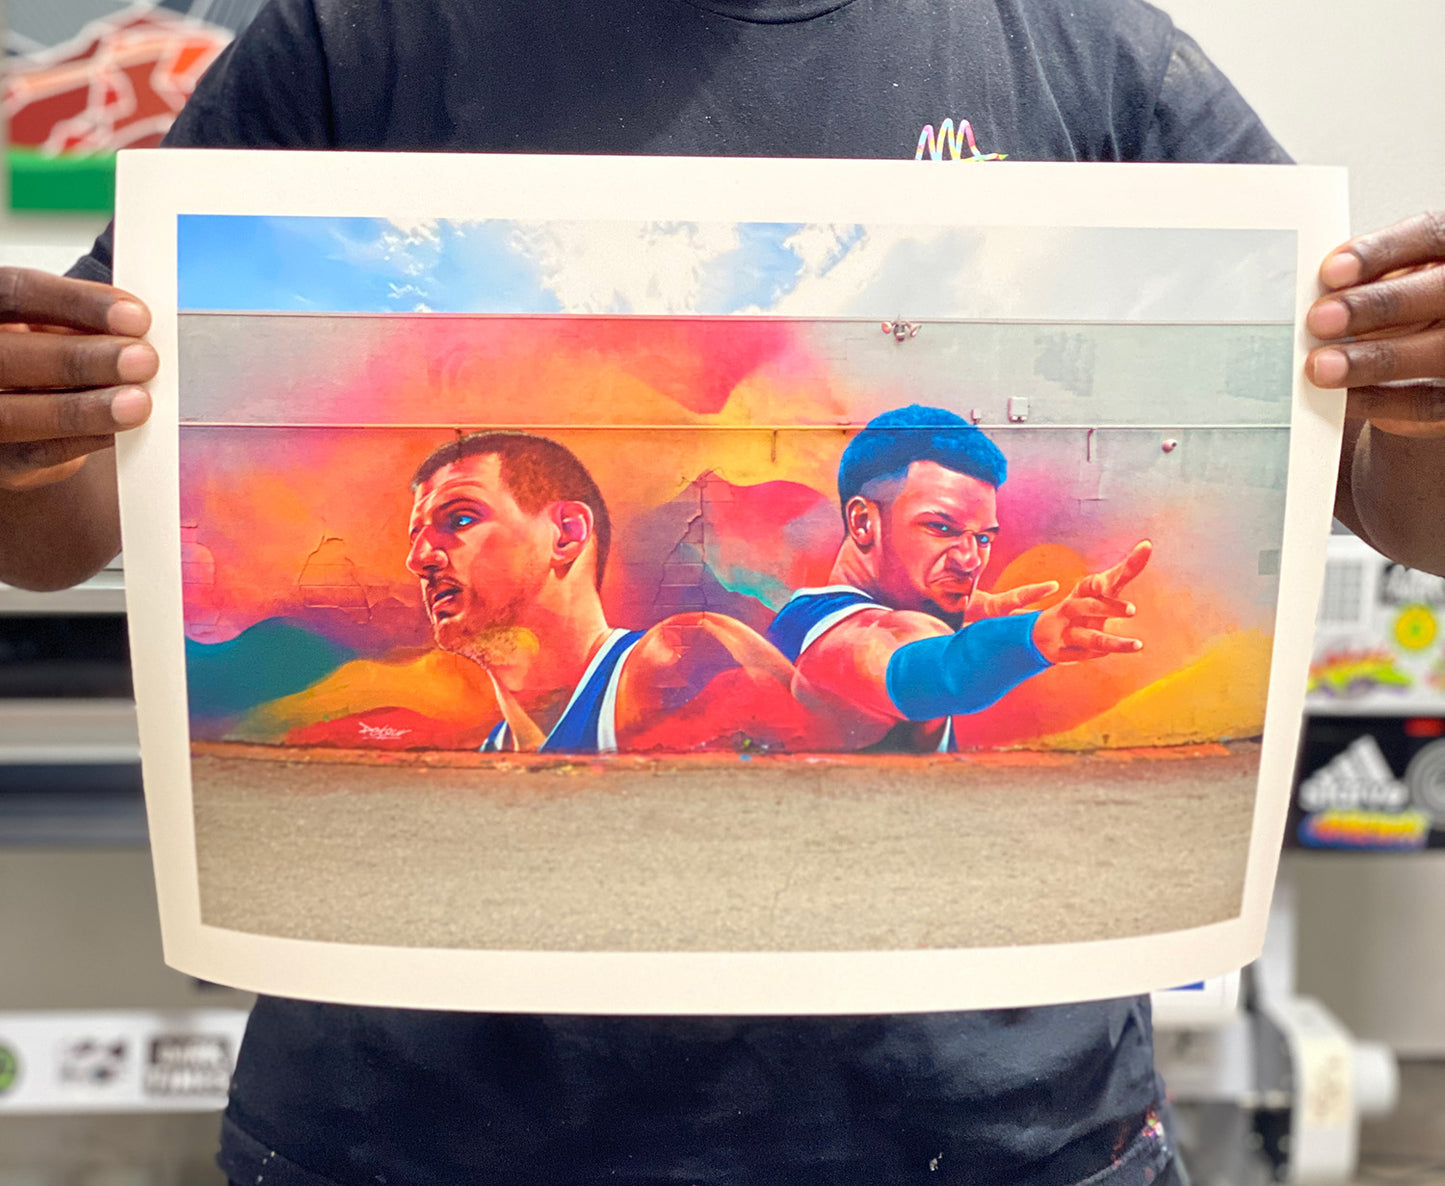 Go Nuggets Mural (signed)